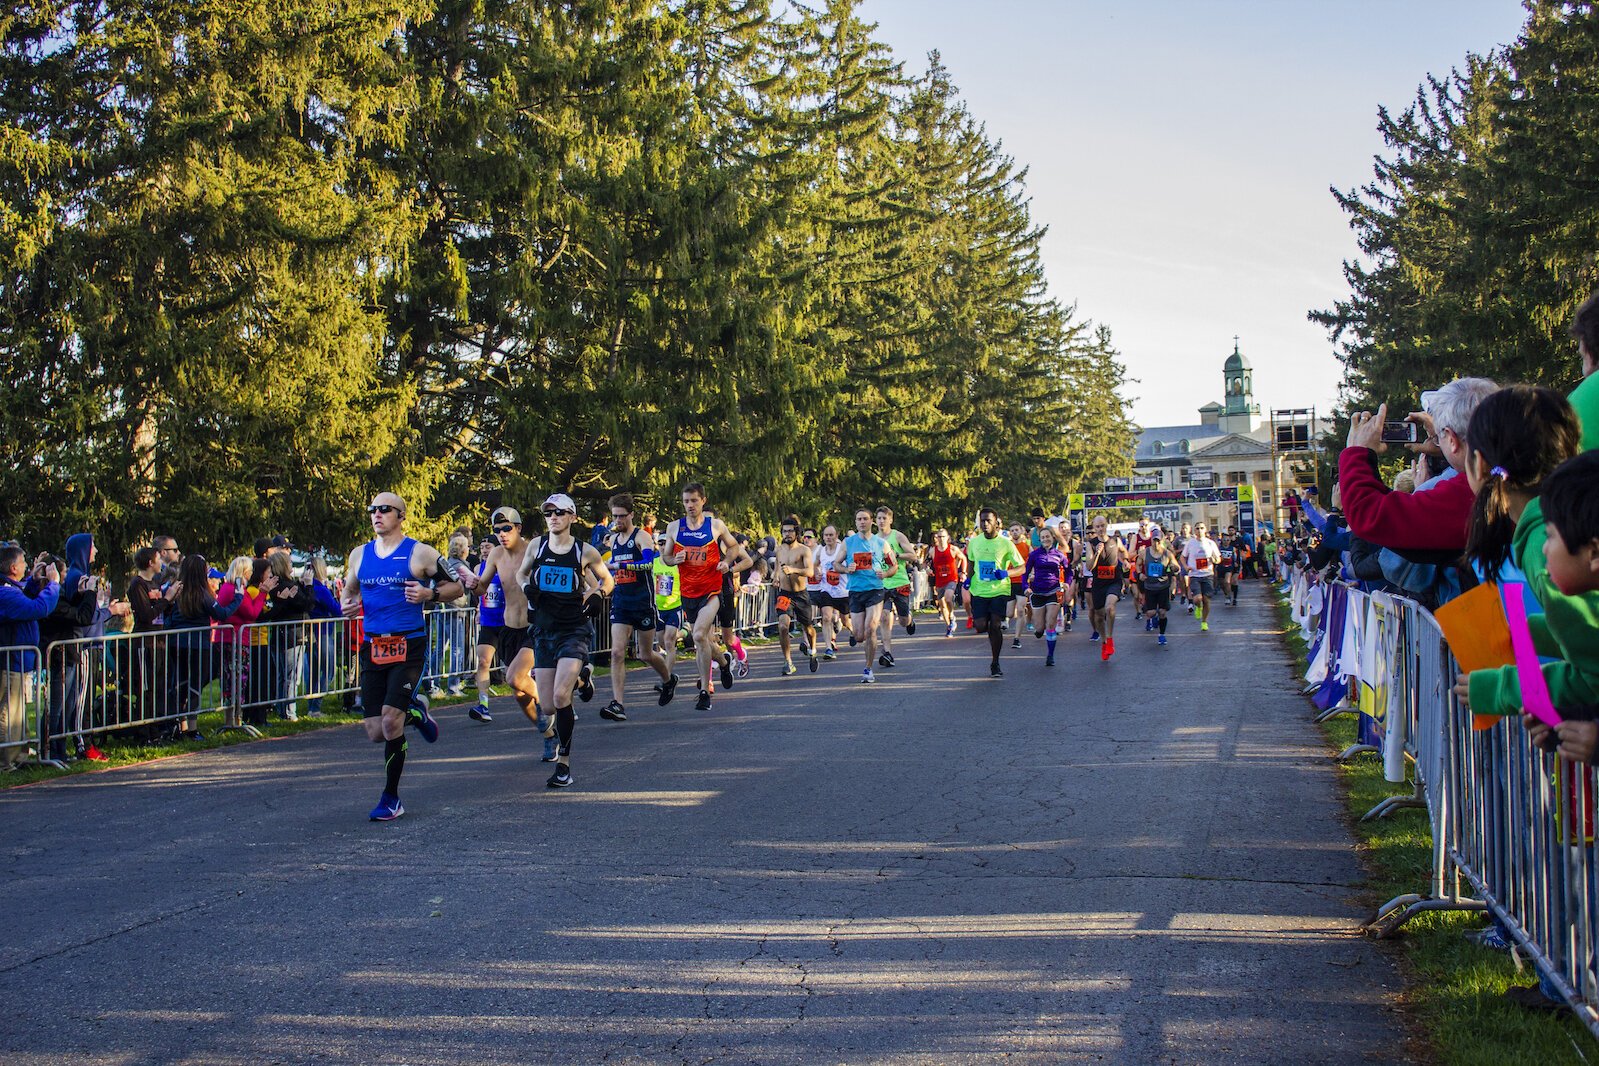 A shot from the 2019 Marathon shows runners and those encouraging their run.